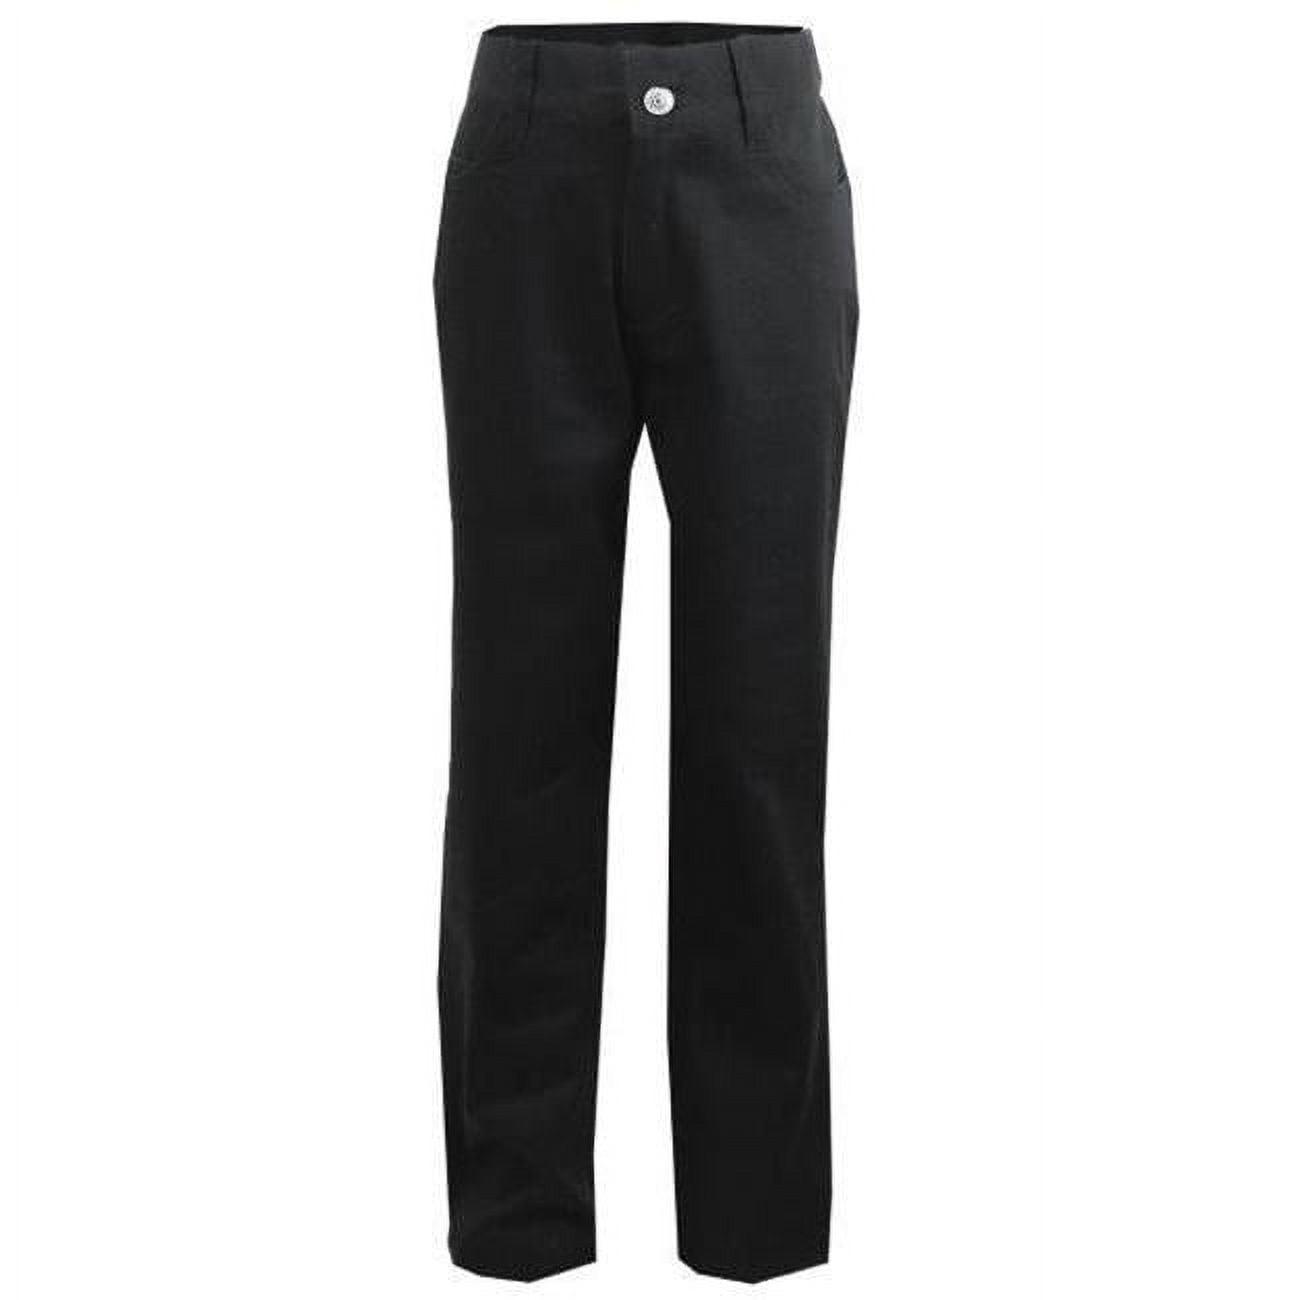 Picture of DDI 2269994 Juniors&apos; Black Fashion Stretch Skinny Pants - Size 1/2 Case of 24